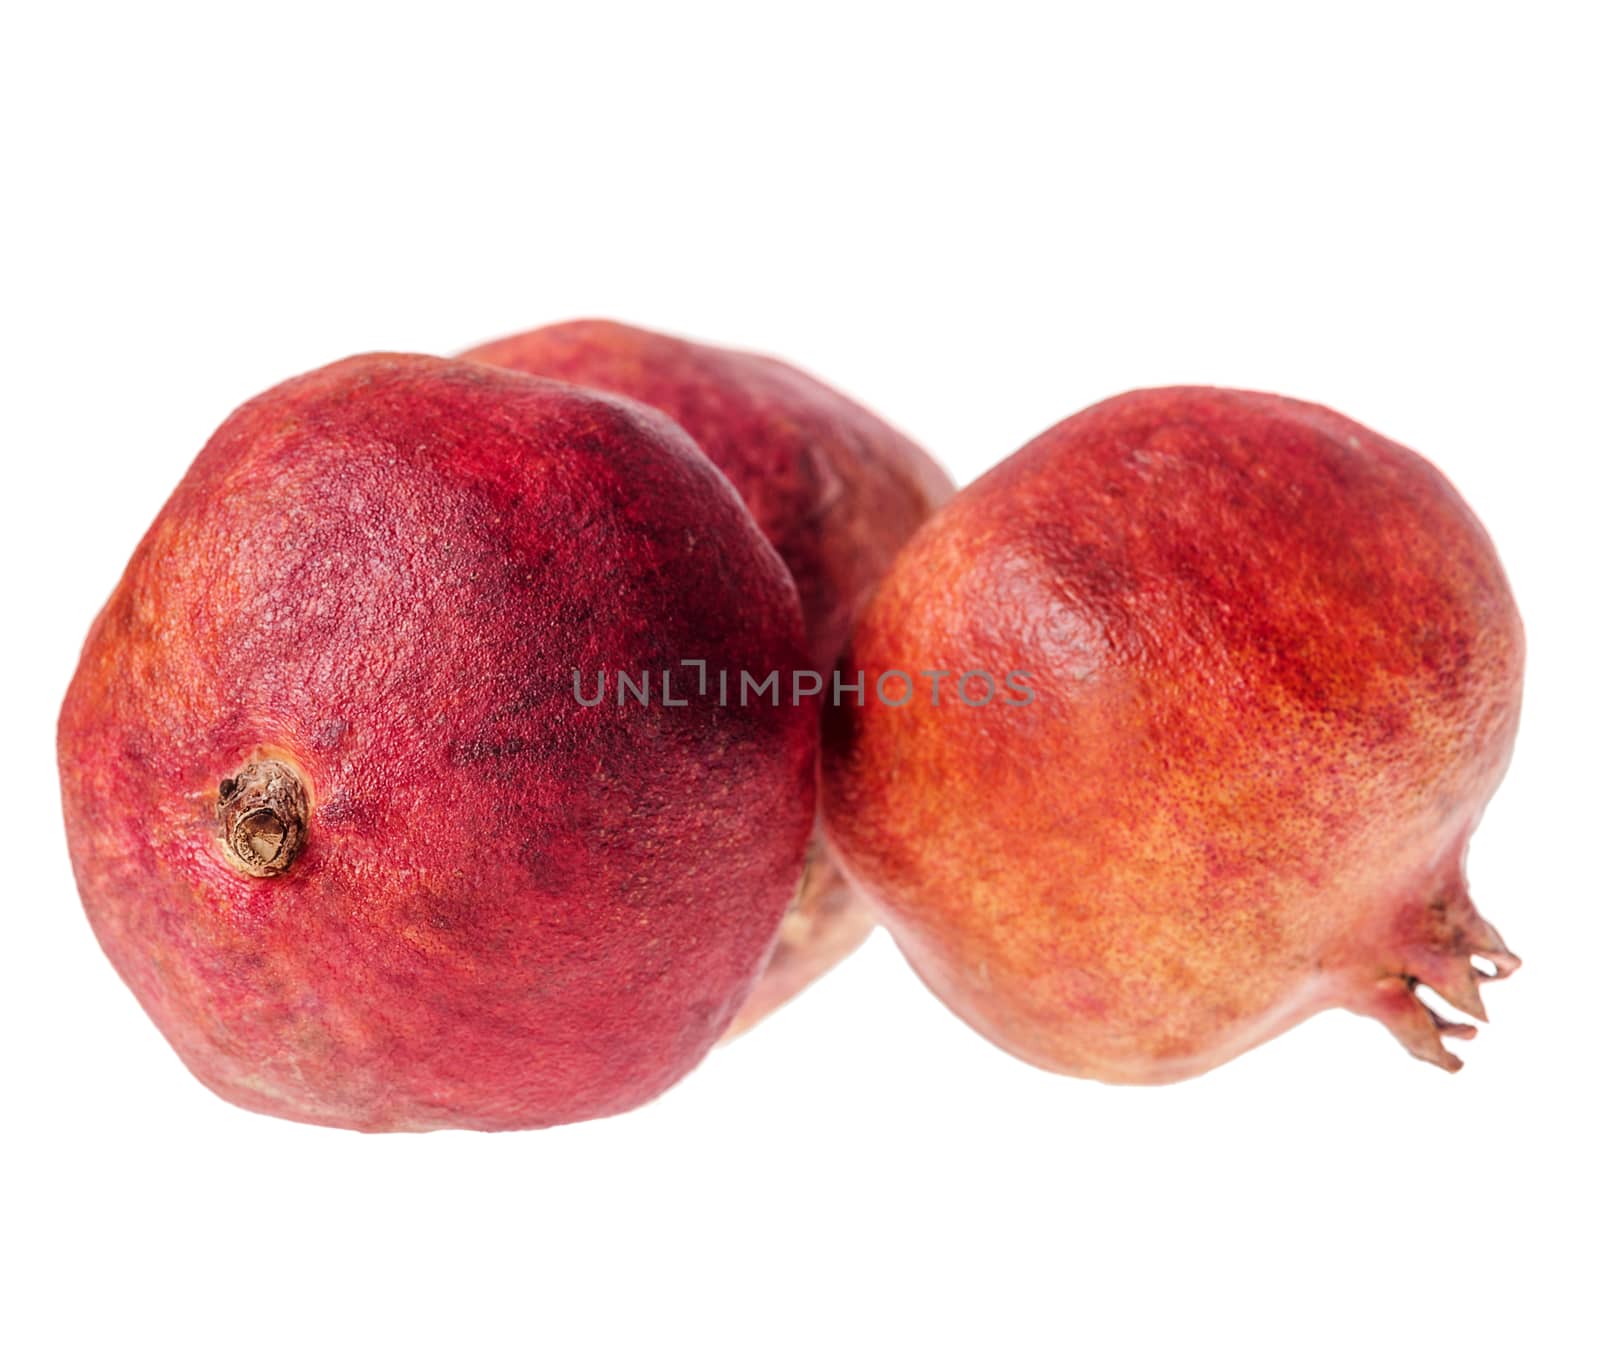 Three ripe jusy pomegranate isolated on white background